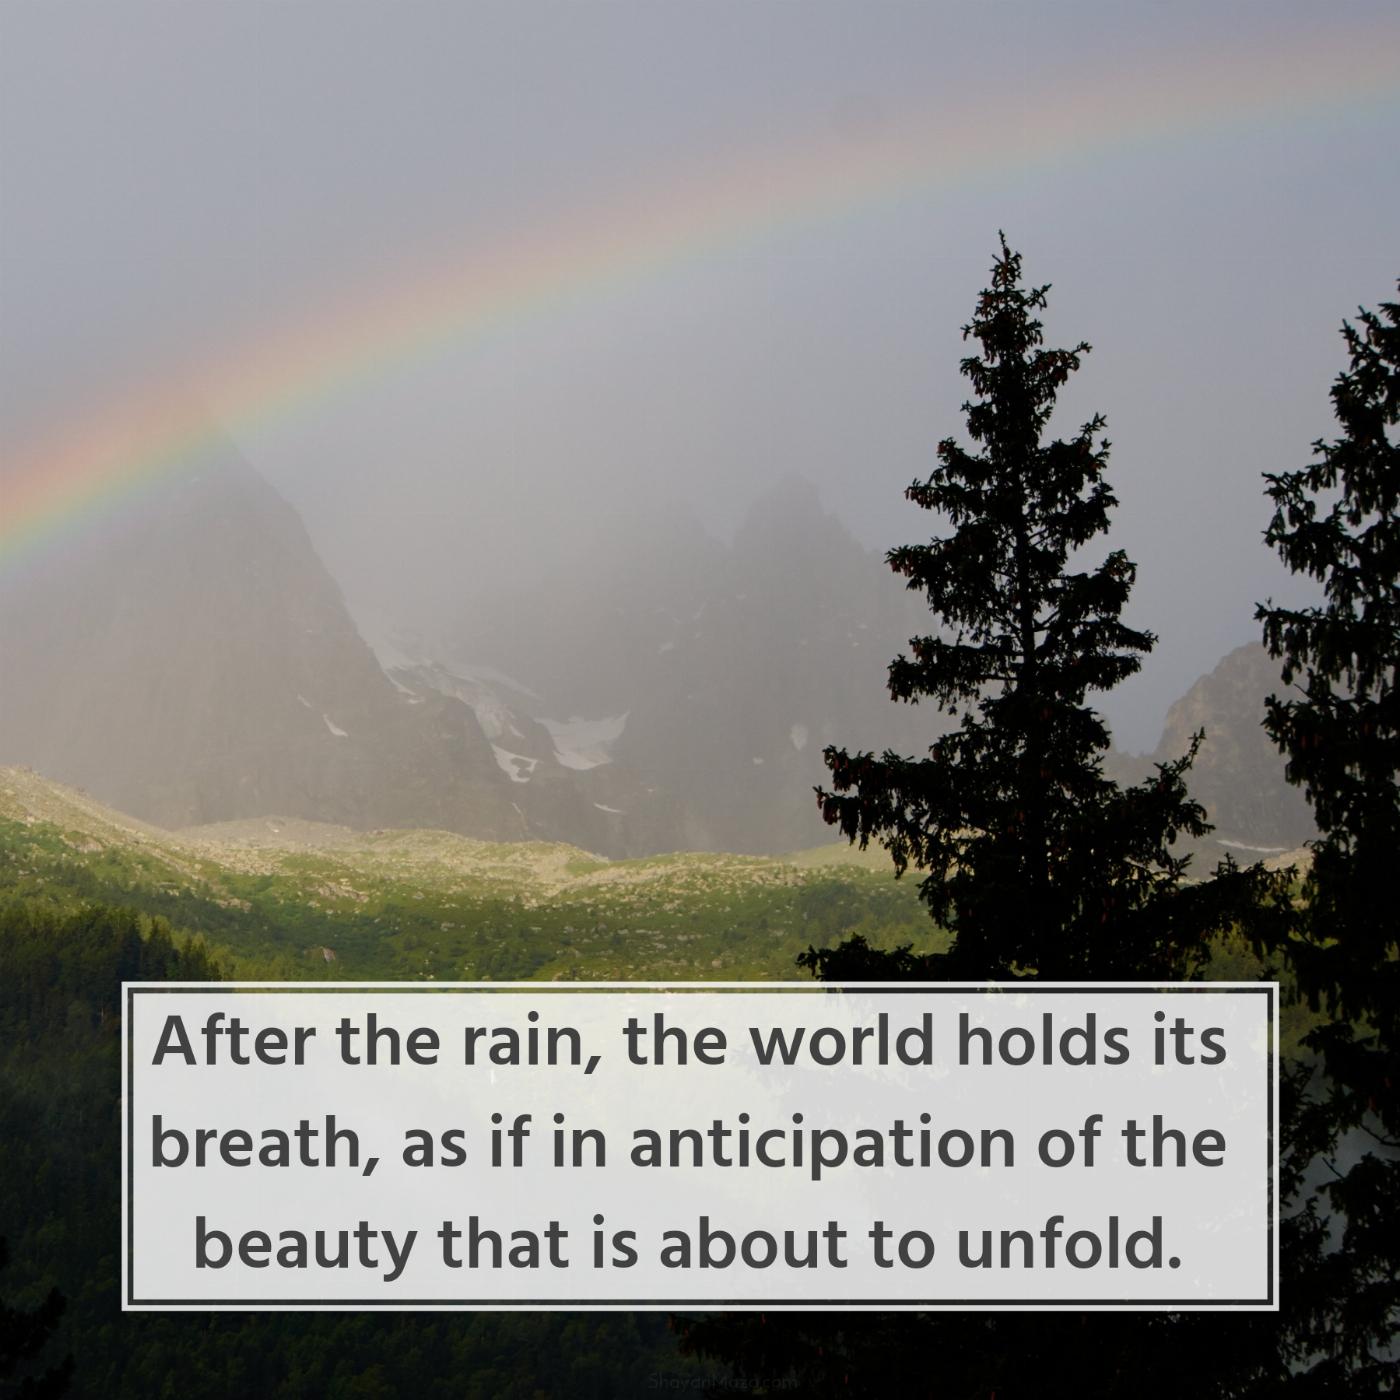 After the rain the world holds its breath as if in anticipation of the beauty